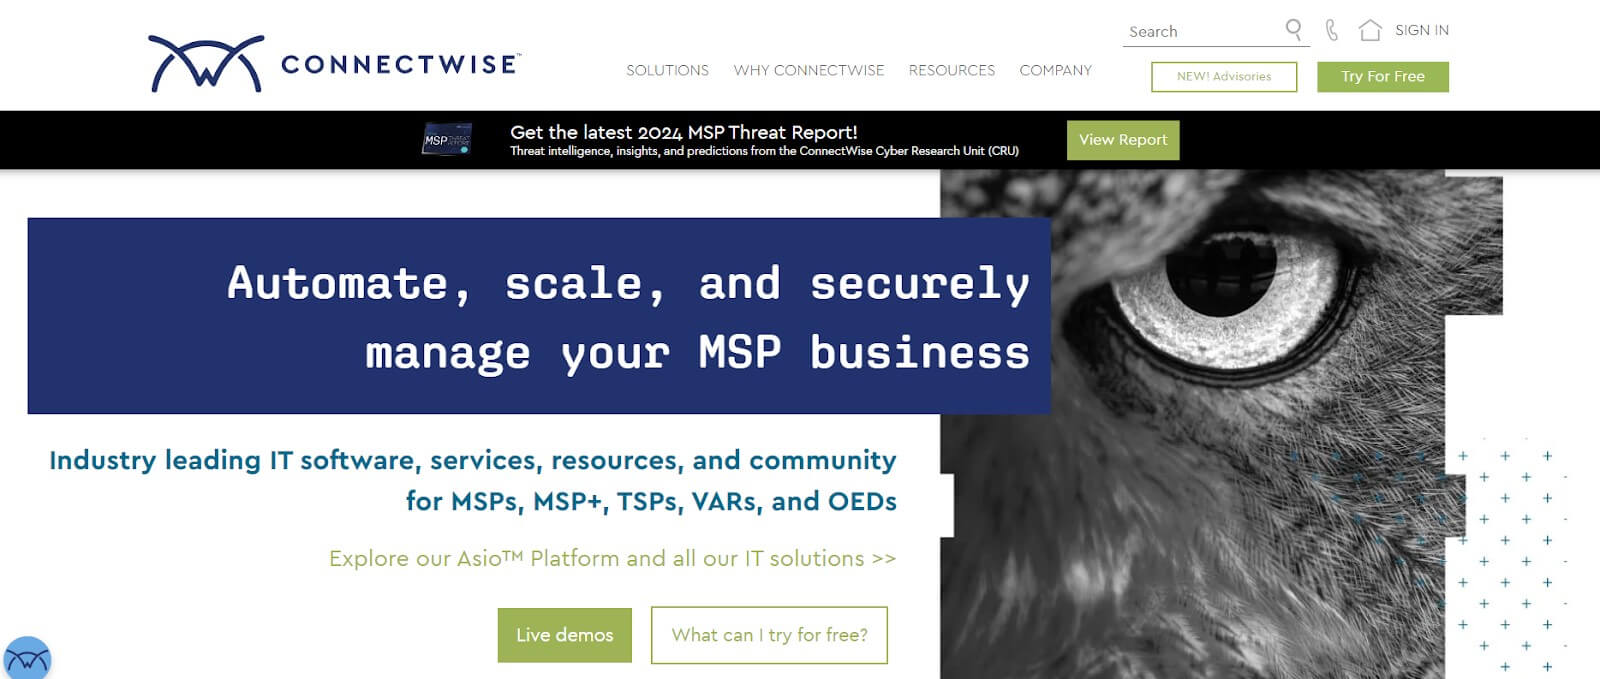 ConnectWise homepage promoting automation of MSP business with a striking eye illustration and a blue-themed banner.